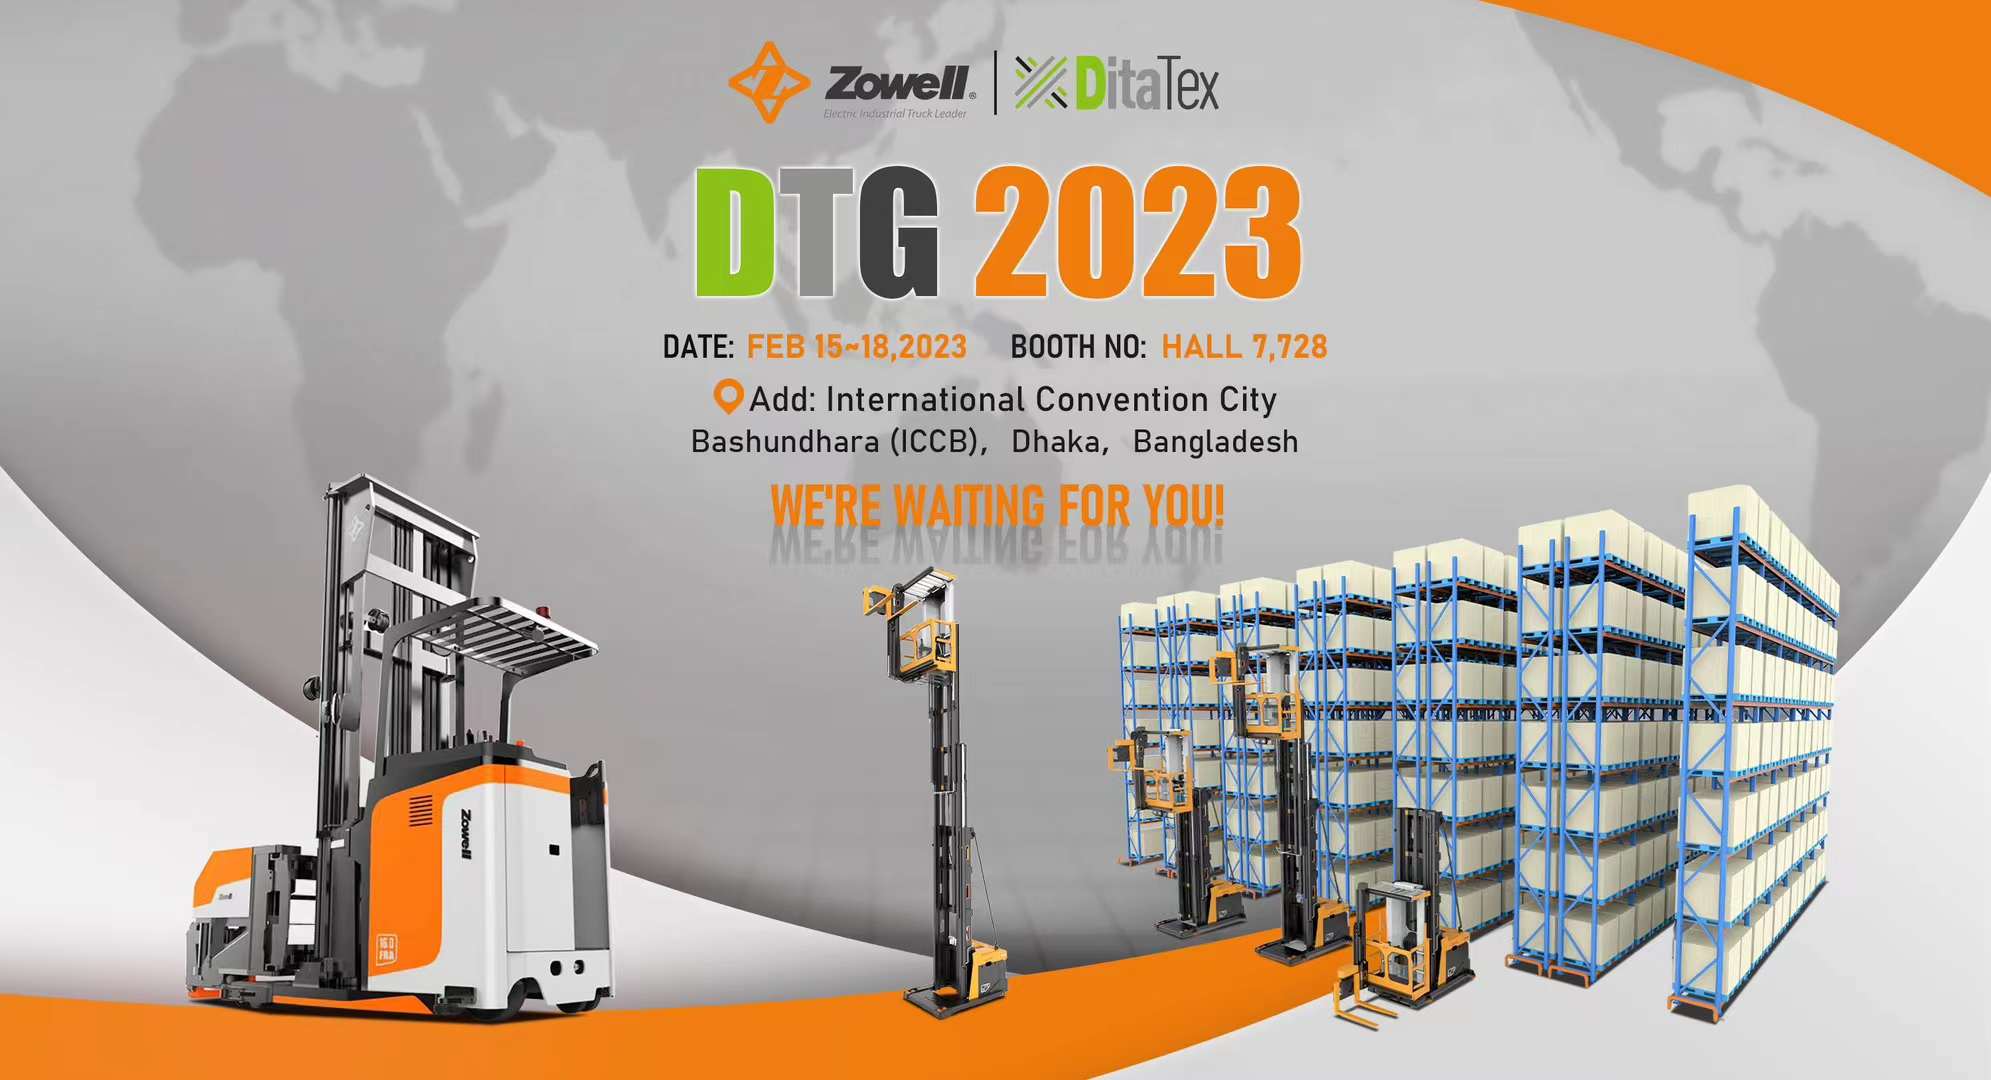 DTG 2023 Exhibition: Zowell and DitaTex at International Convention City Bashundhara (ICCB) in Bangladesh